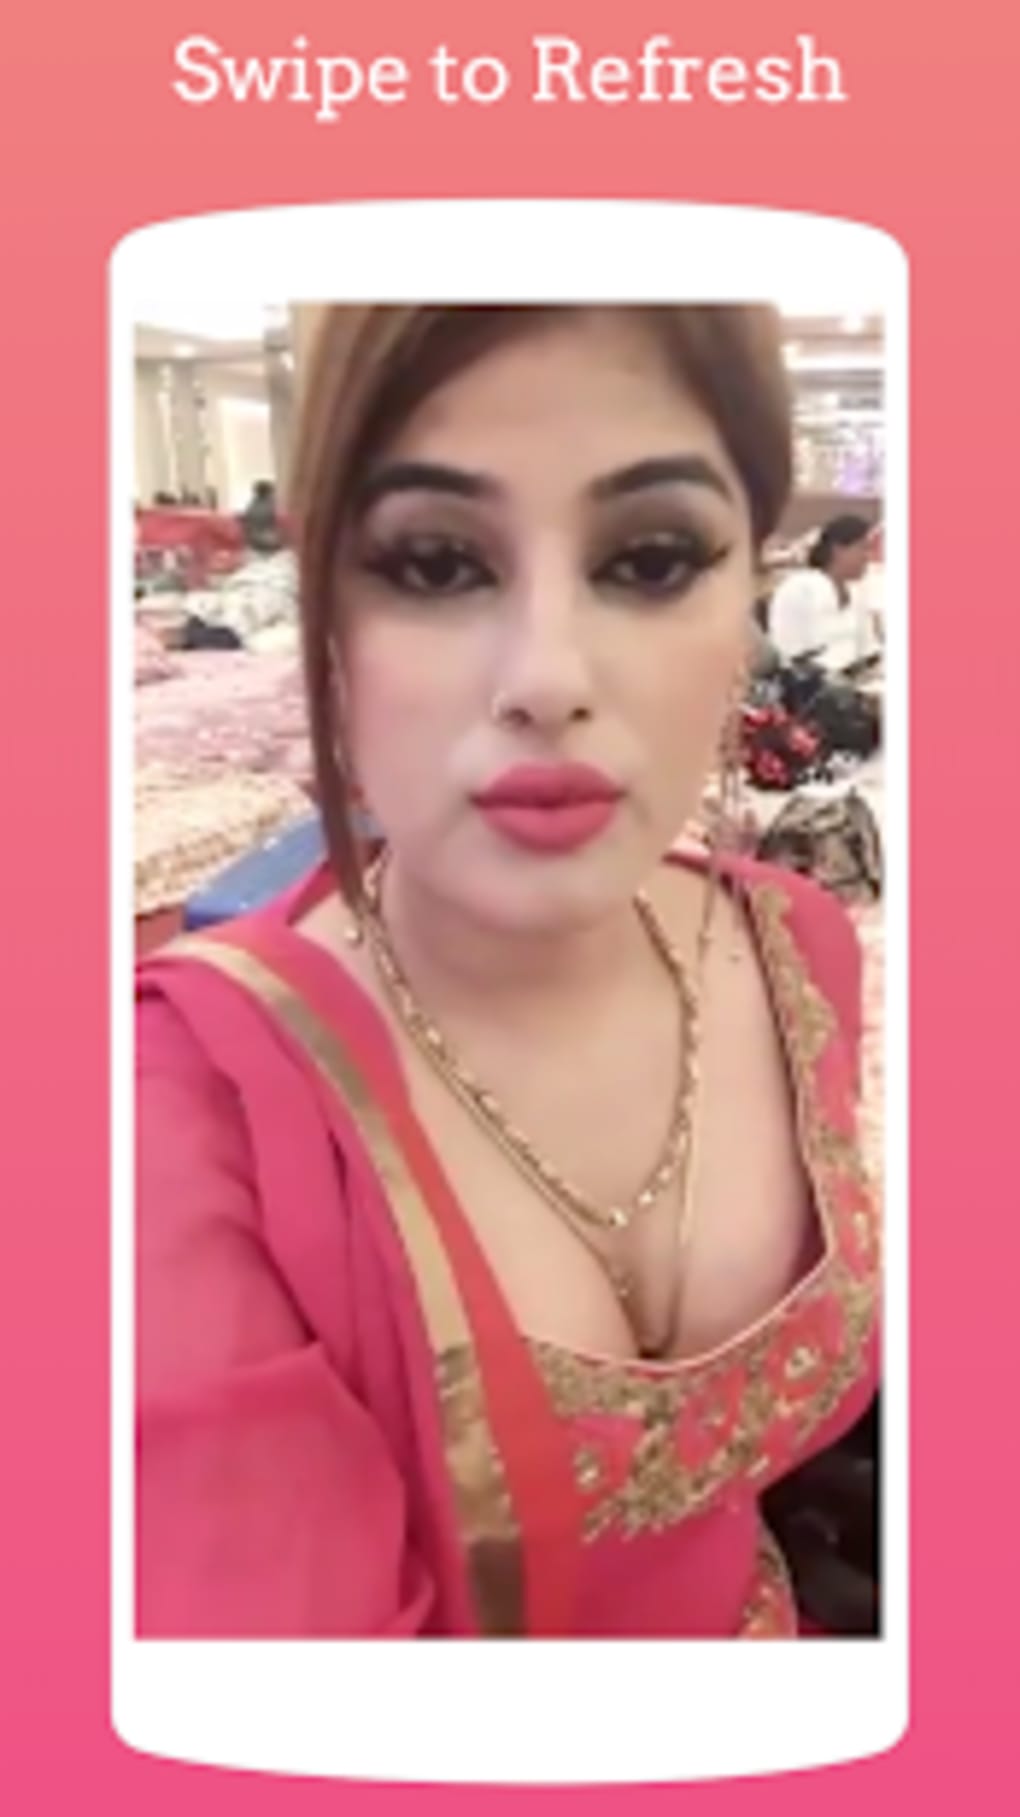 desi dating apps in us